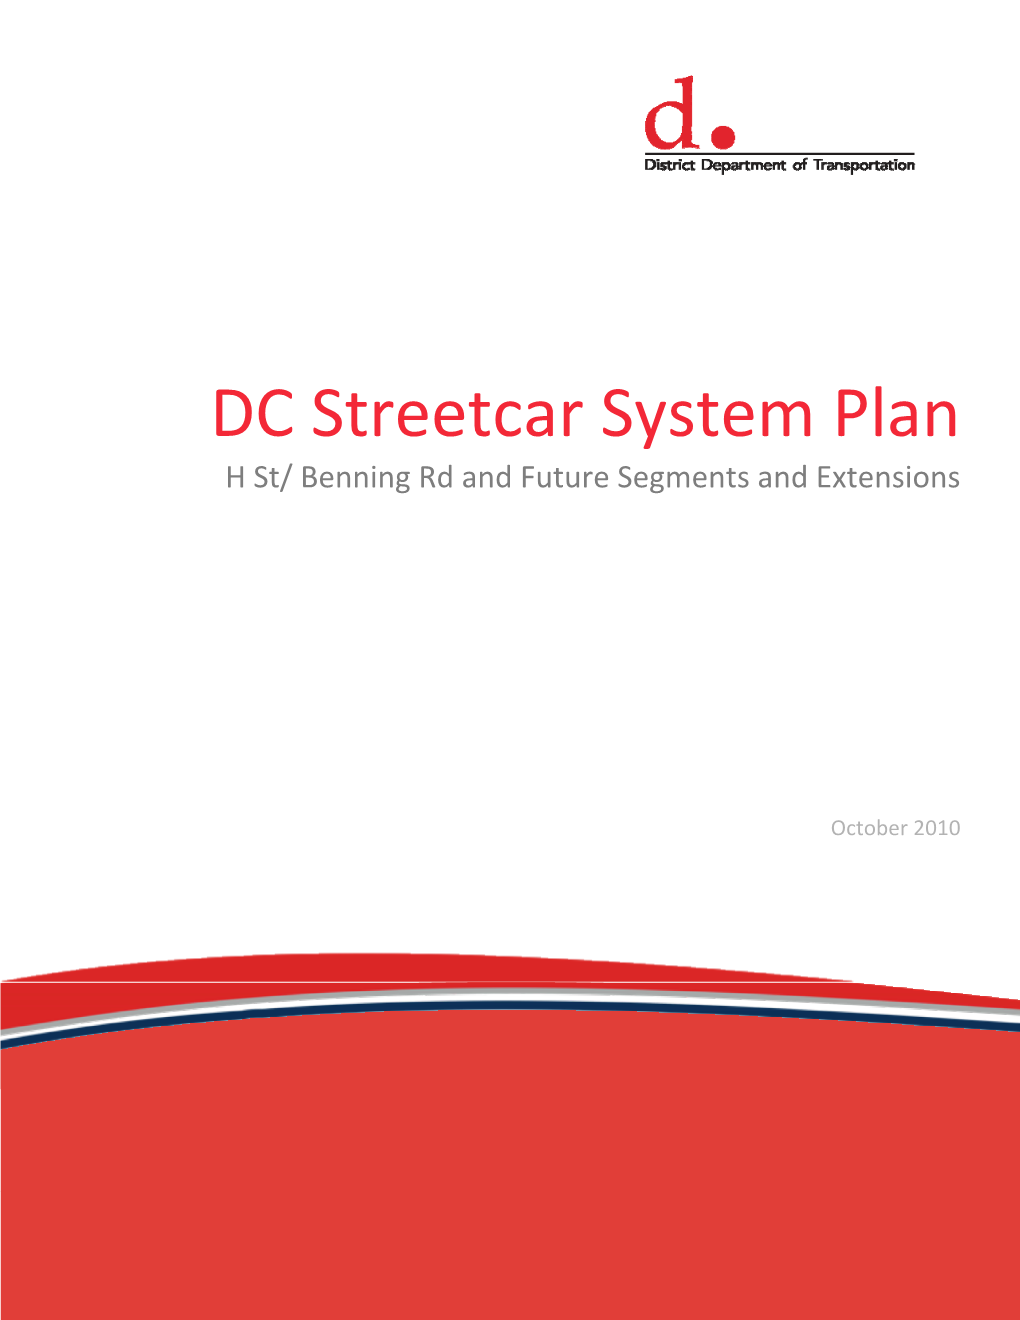 DC Streetcar System Plan H St/ Benning Rd and Future Segments and Extensions